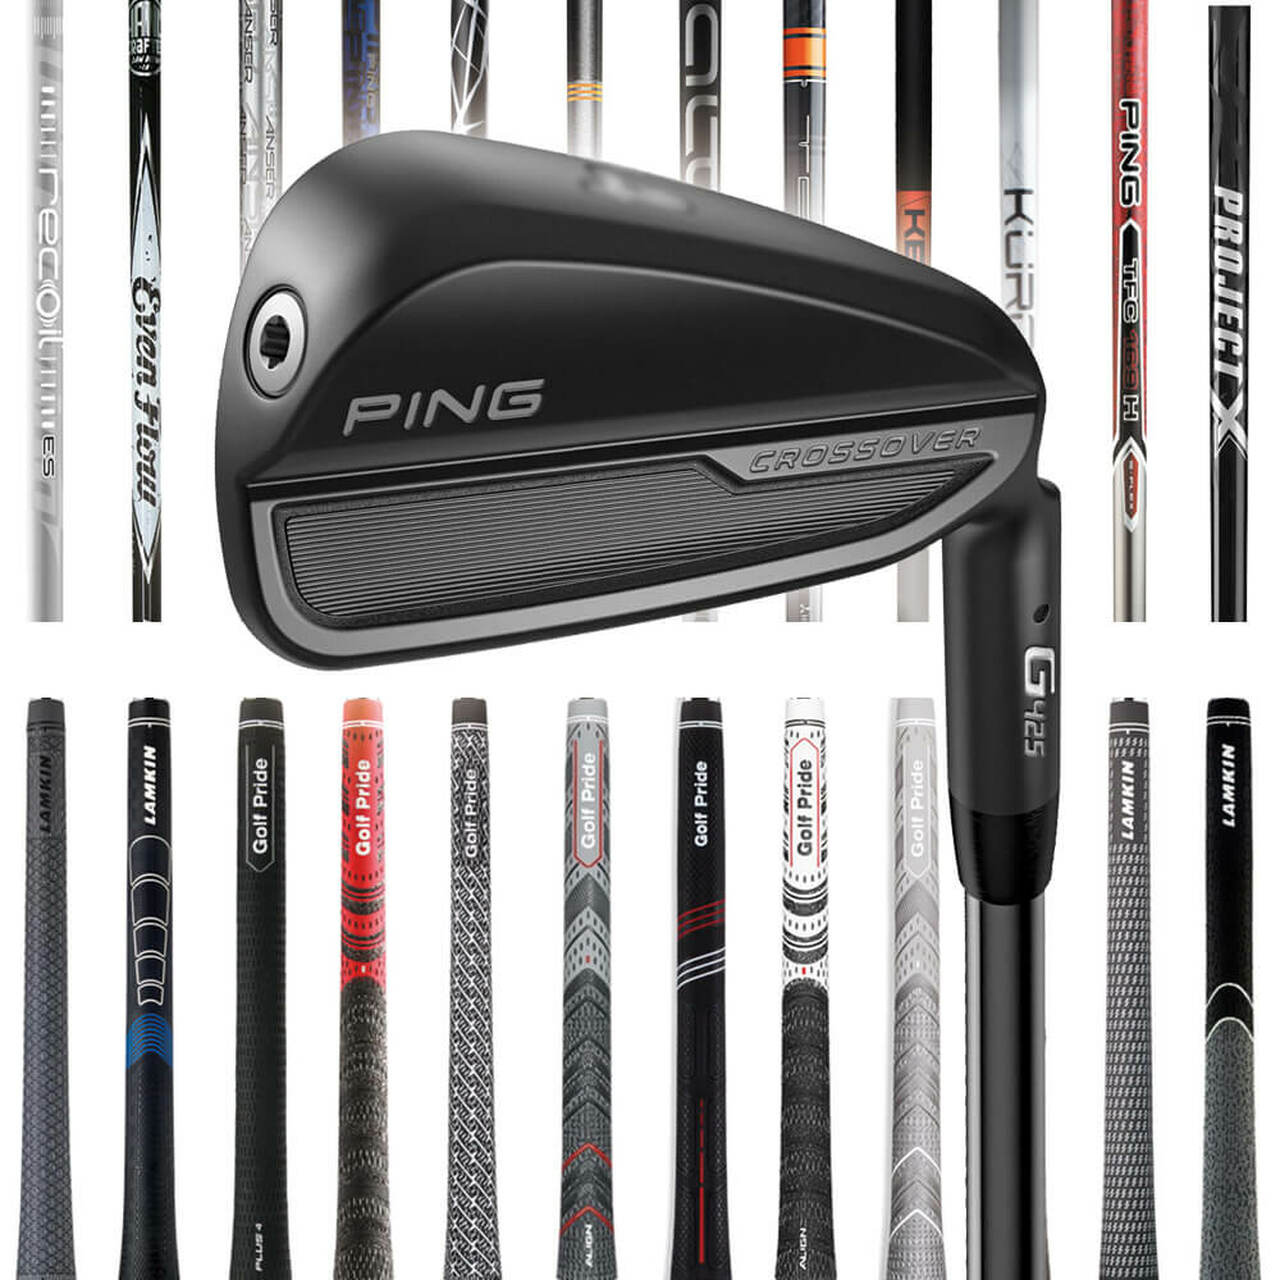 PING G425 Crossover Custom Utility Irons